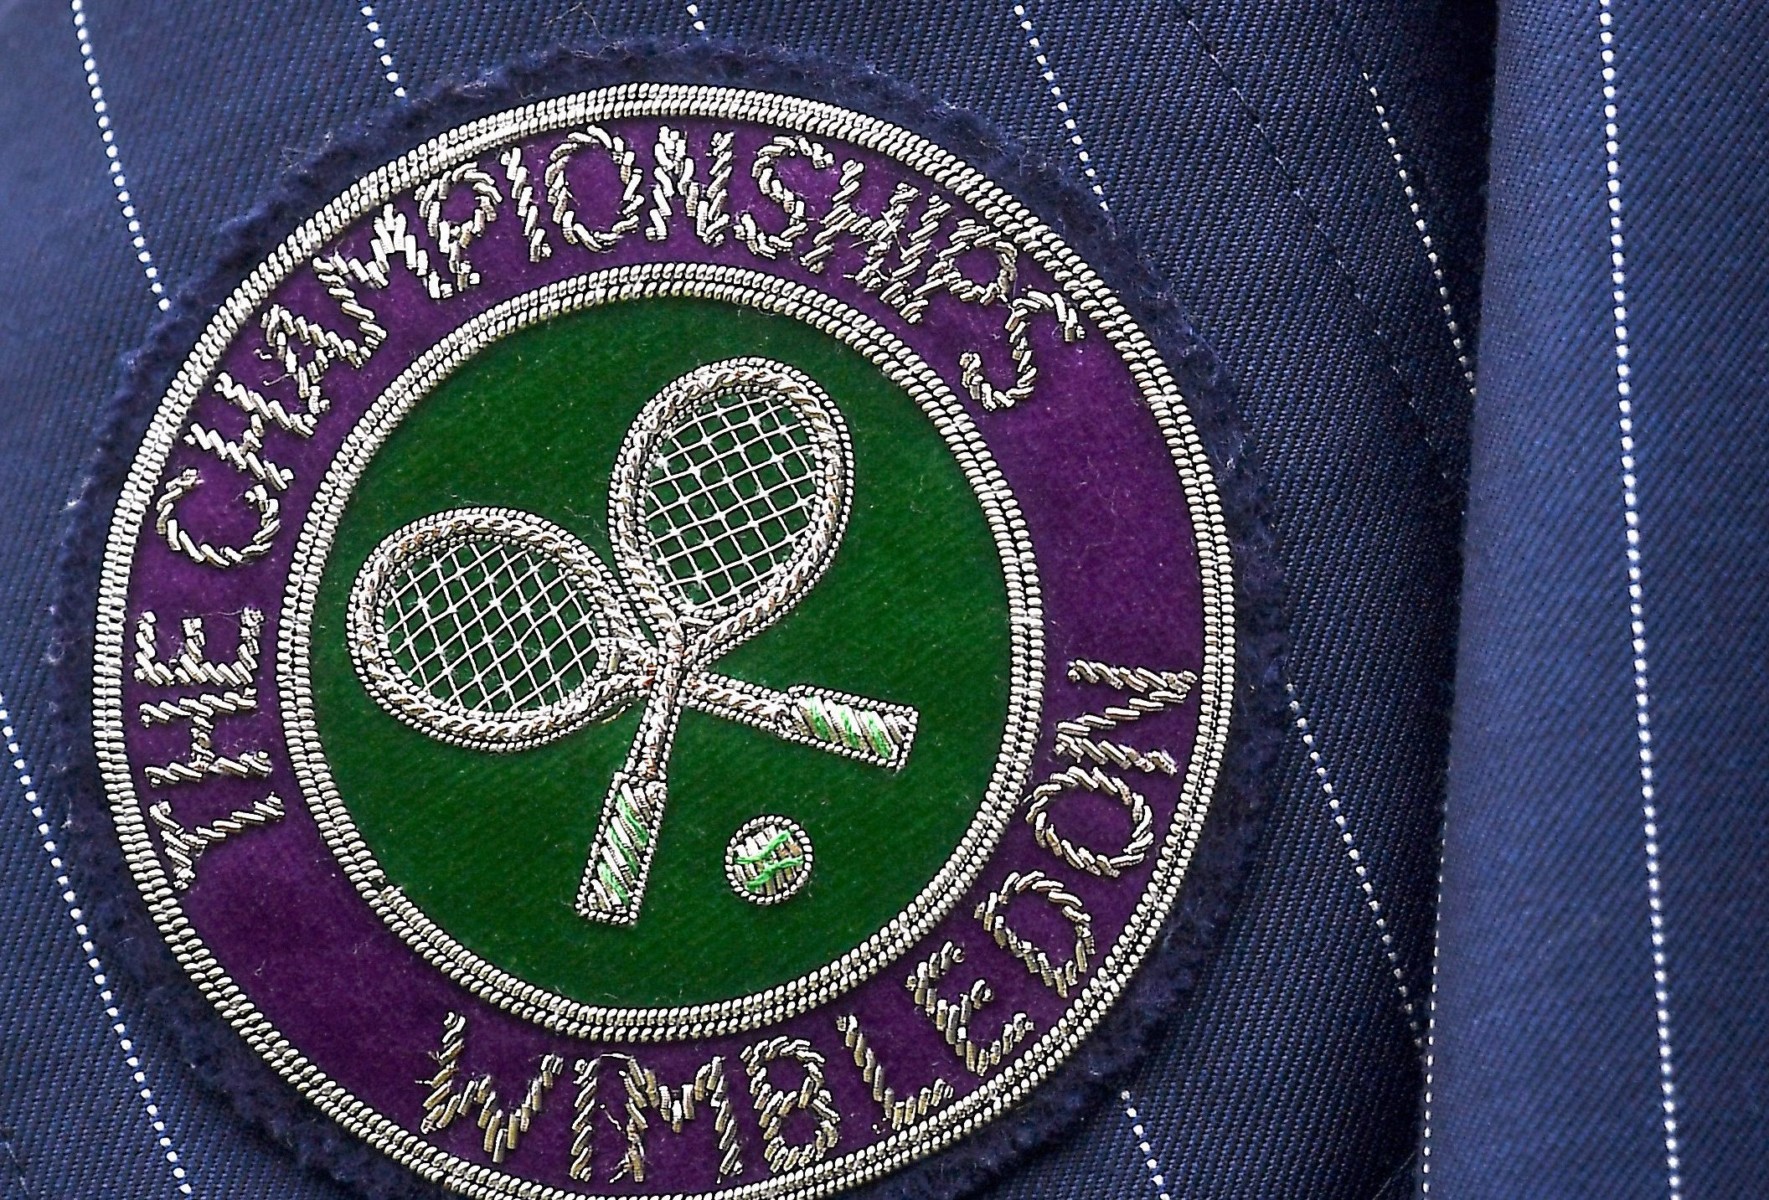 , Wimbledon chiefs to make decision next week on whether to axe championship for the first time since World War II